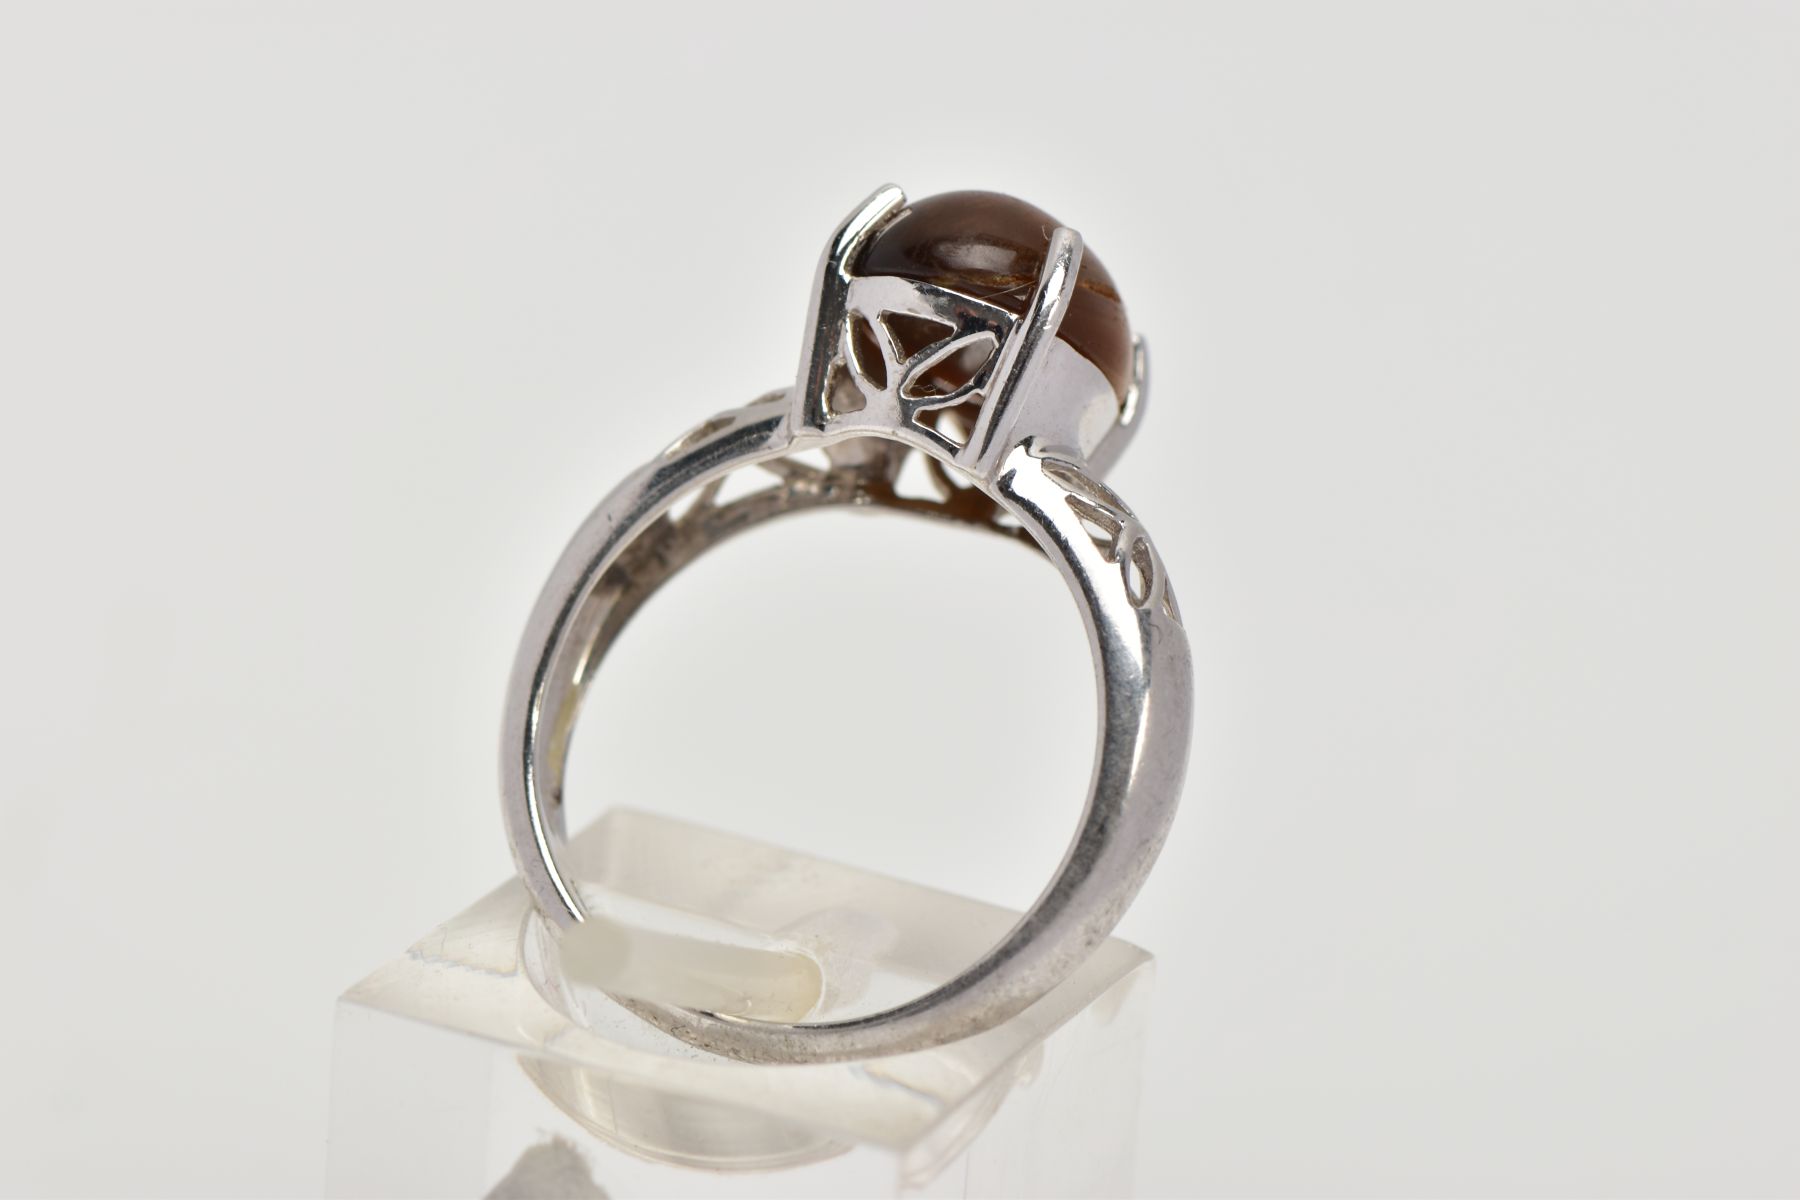 A 9CT WHITE GOLD, TIGER EYE SET RING, designed with an oval tiger eye cabochon, measuring - Image 3 of 4